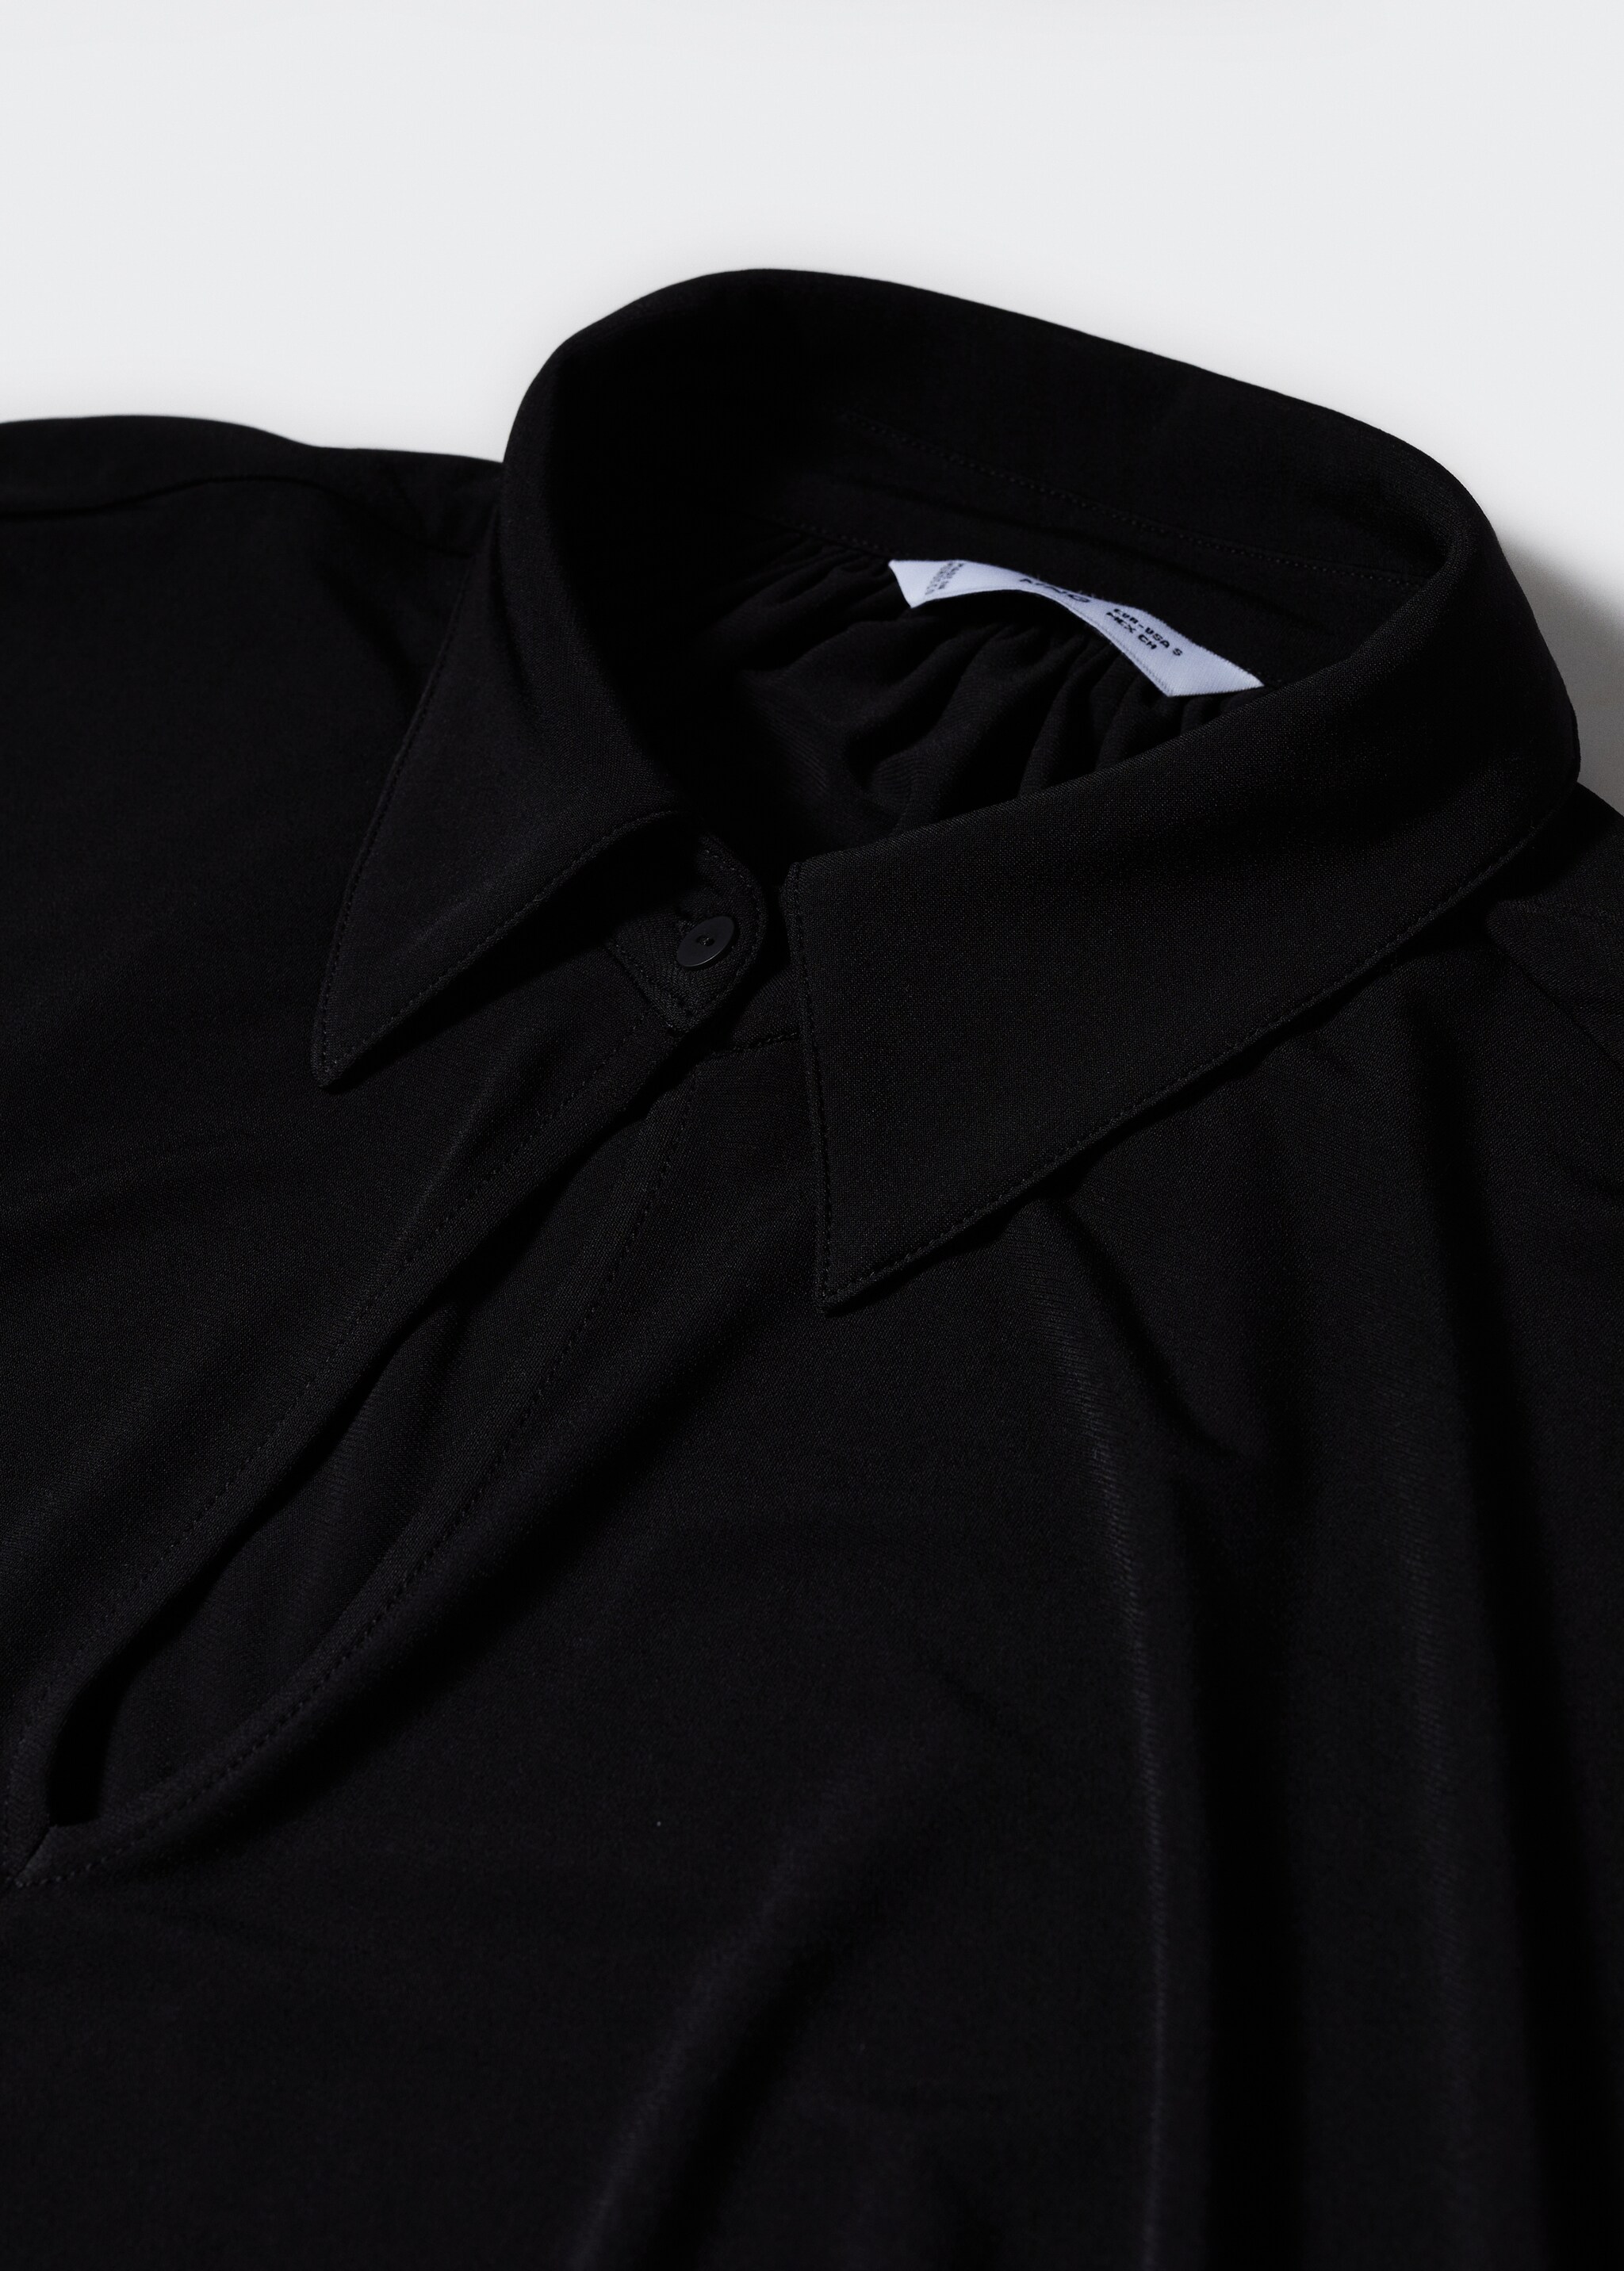 Slit shirt - Details of the article 8